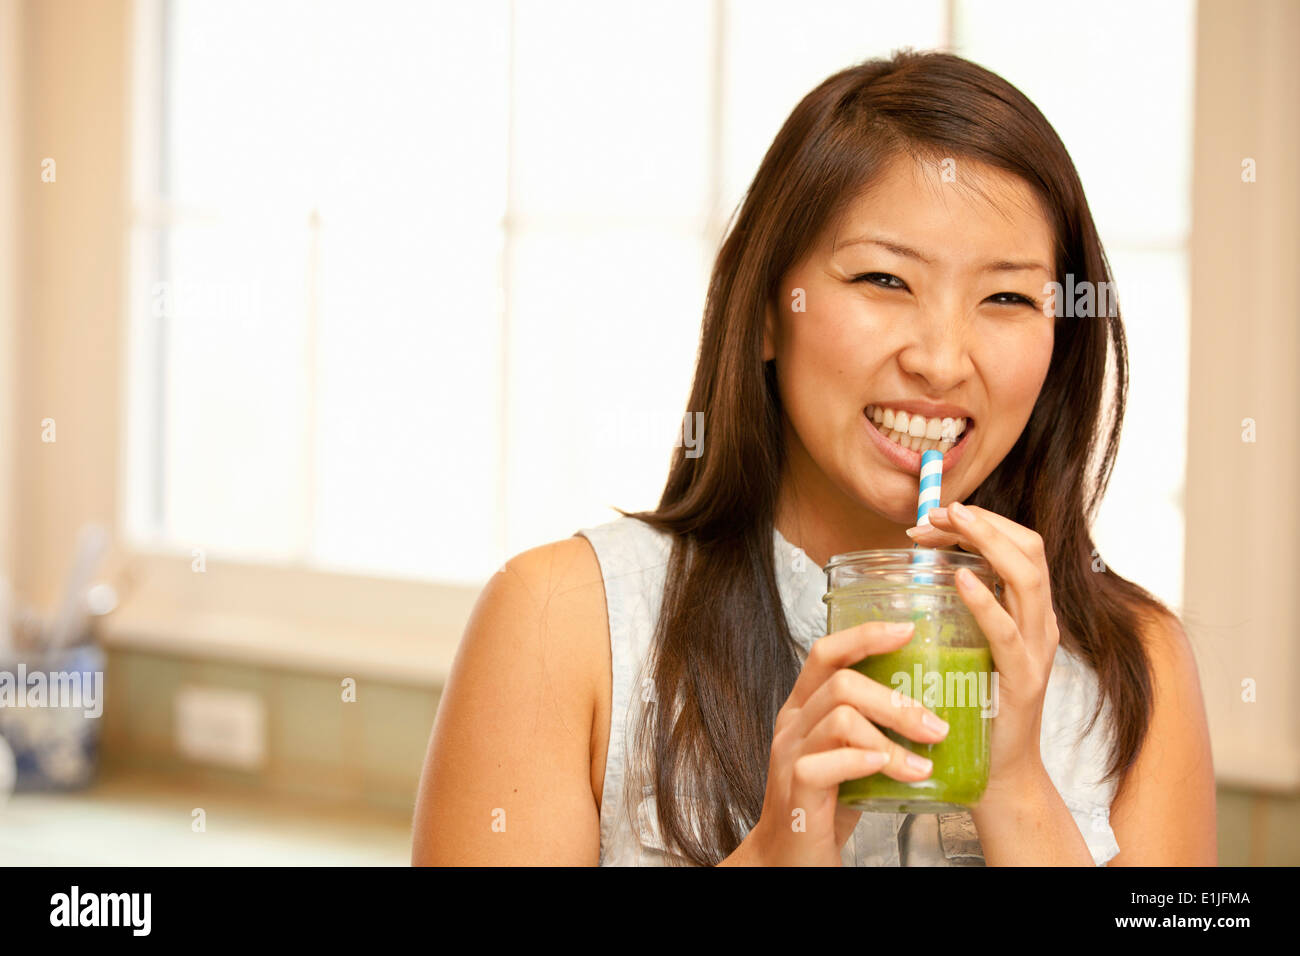 Young woman sipping green smoothie Stock Photo